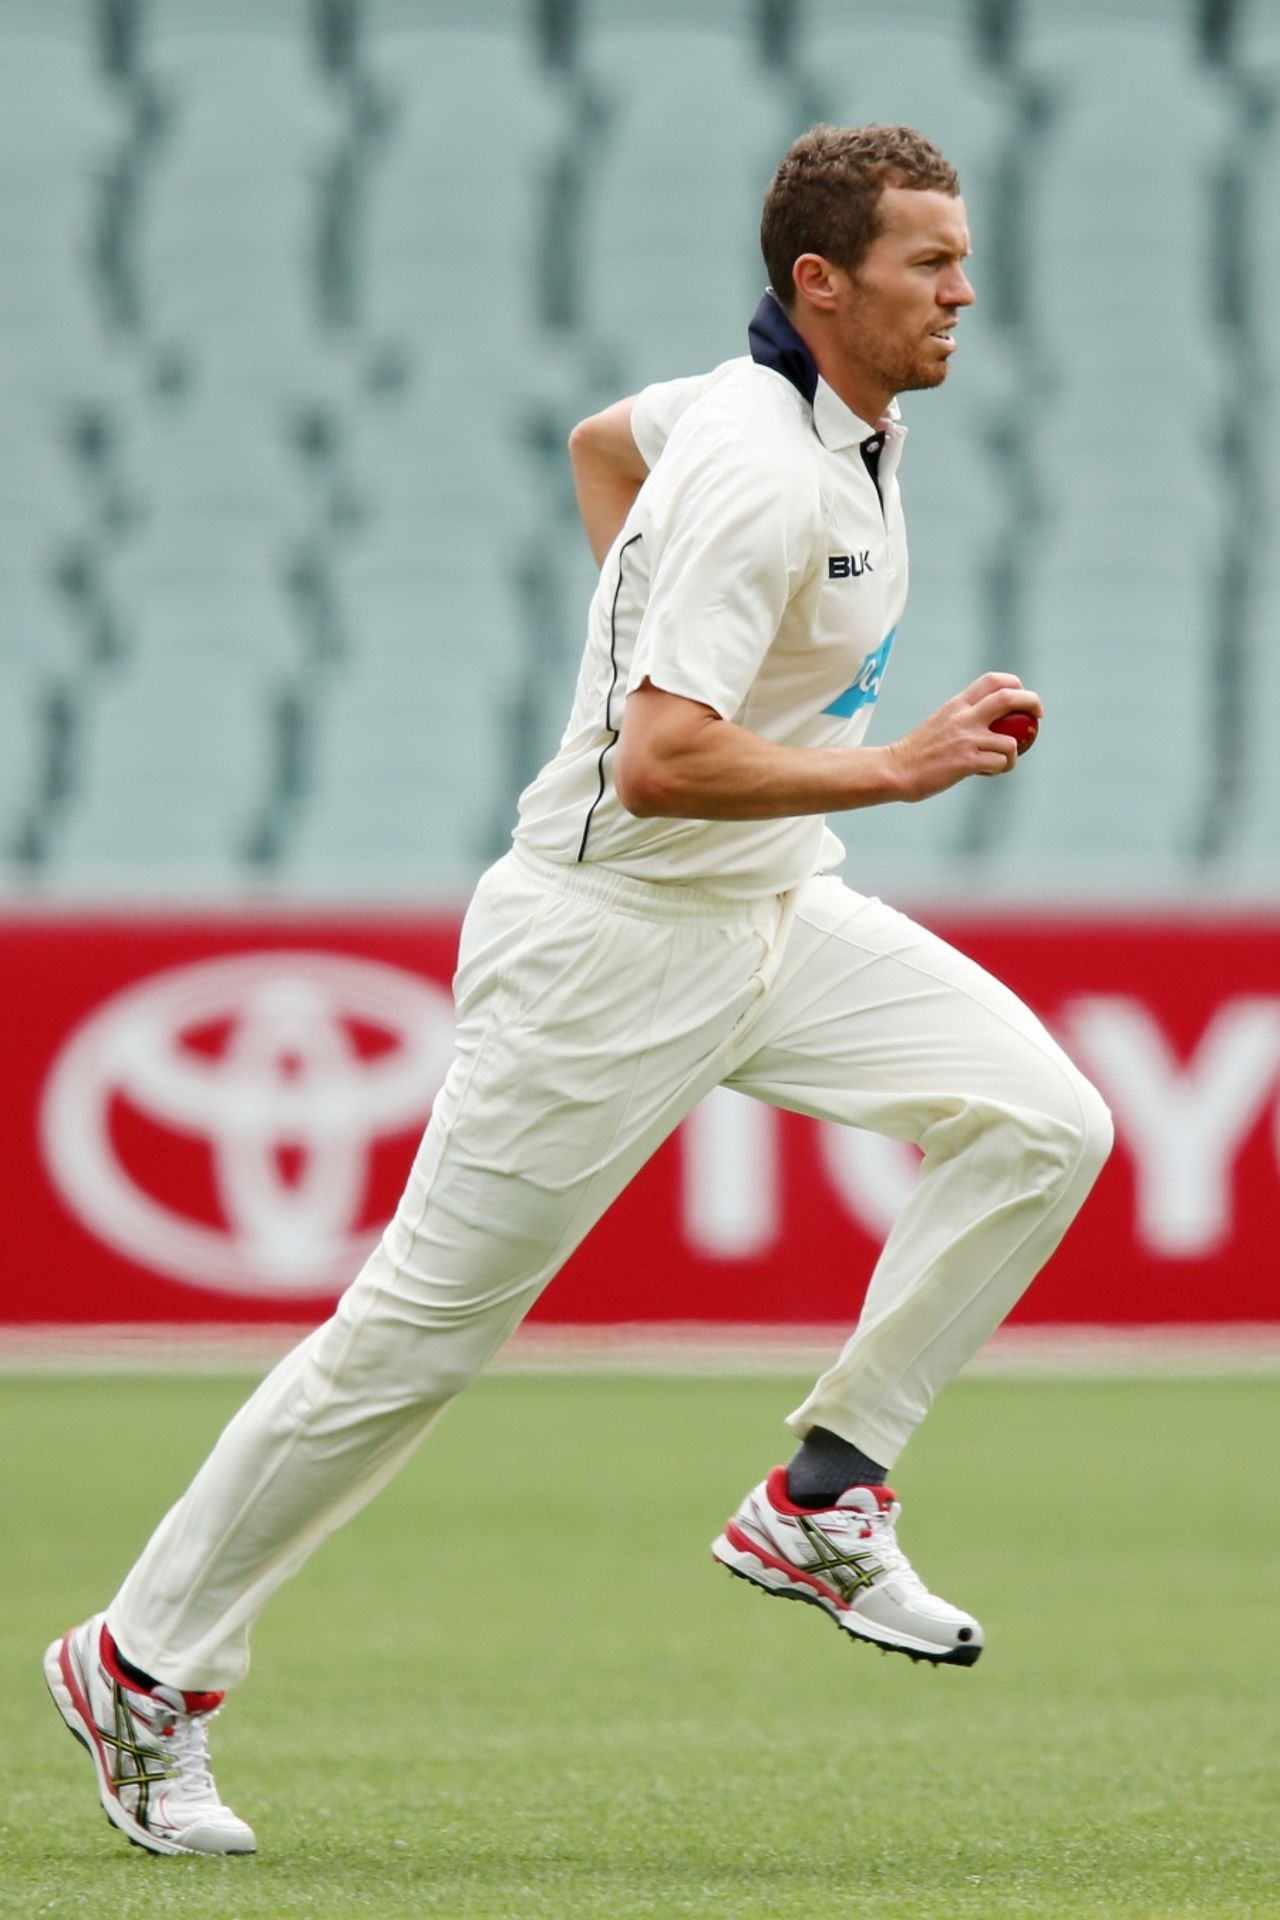 Peter Siddle runs in to bowl, South Australia v Victoria, Sheffield Shield, Adelaide, 1st day, November 16, 2014